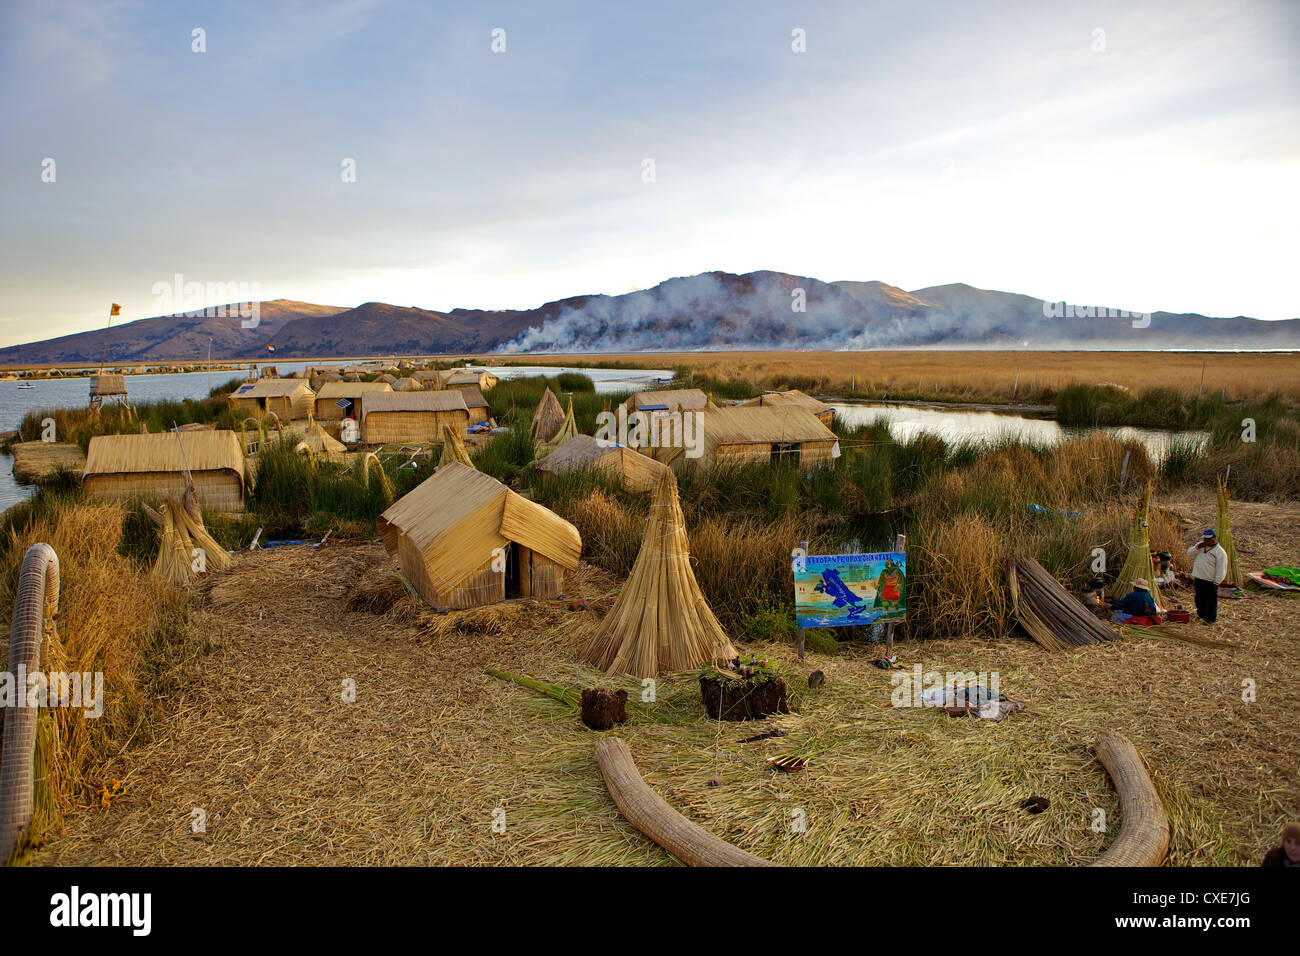 Floating islands of the Uros people, traditional reed boats and reed houses, Lake Titicaca, peru, peruvian, South America Stock Photo